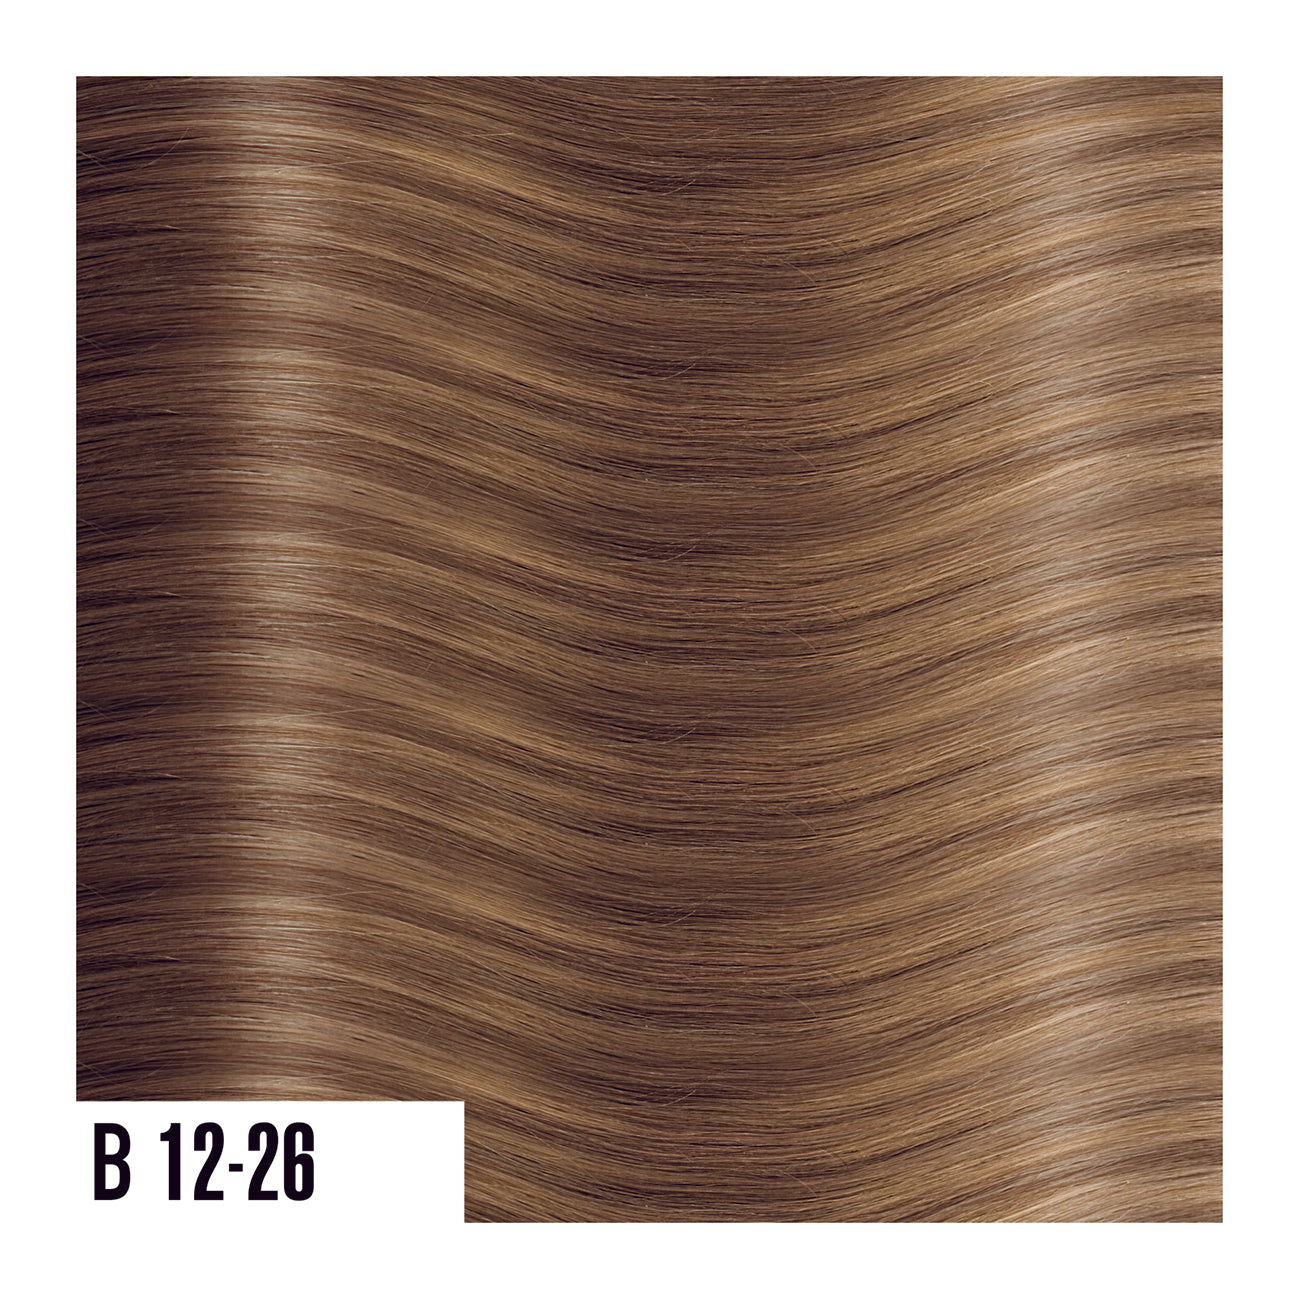 Keratin Extensions Blend of golden brown and gold - Balayage colors are a perfect combination of natural colored roots that blends into highlighted ends.